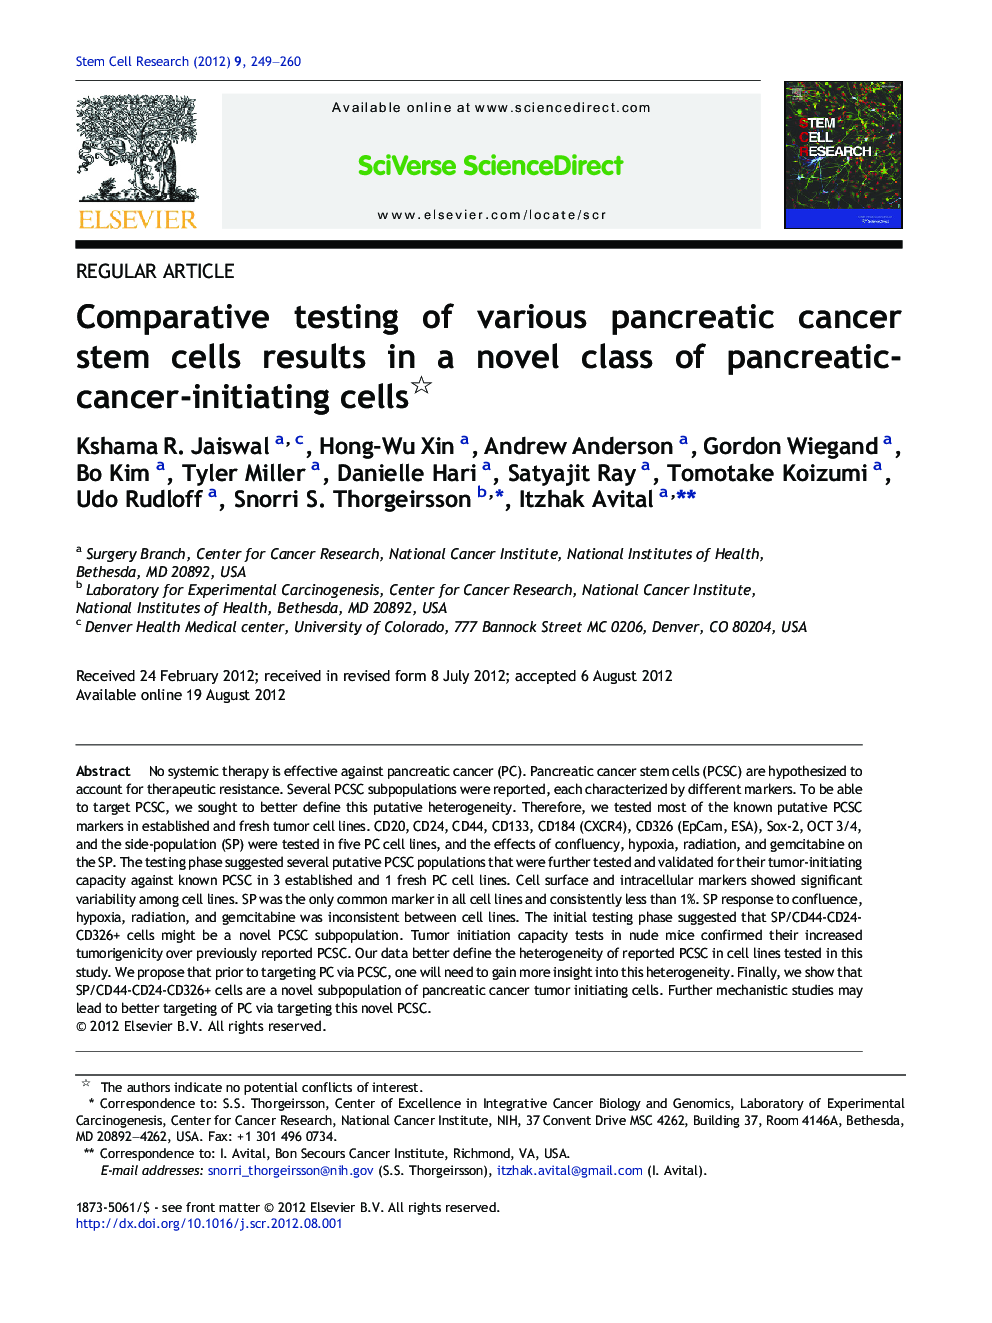 Comparative testing of various pancreatic cancer stem cells results in a novel class of pancreatic-cancer-initiating cells